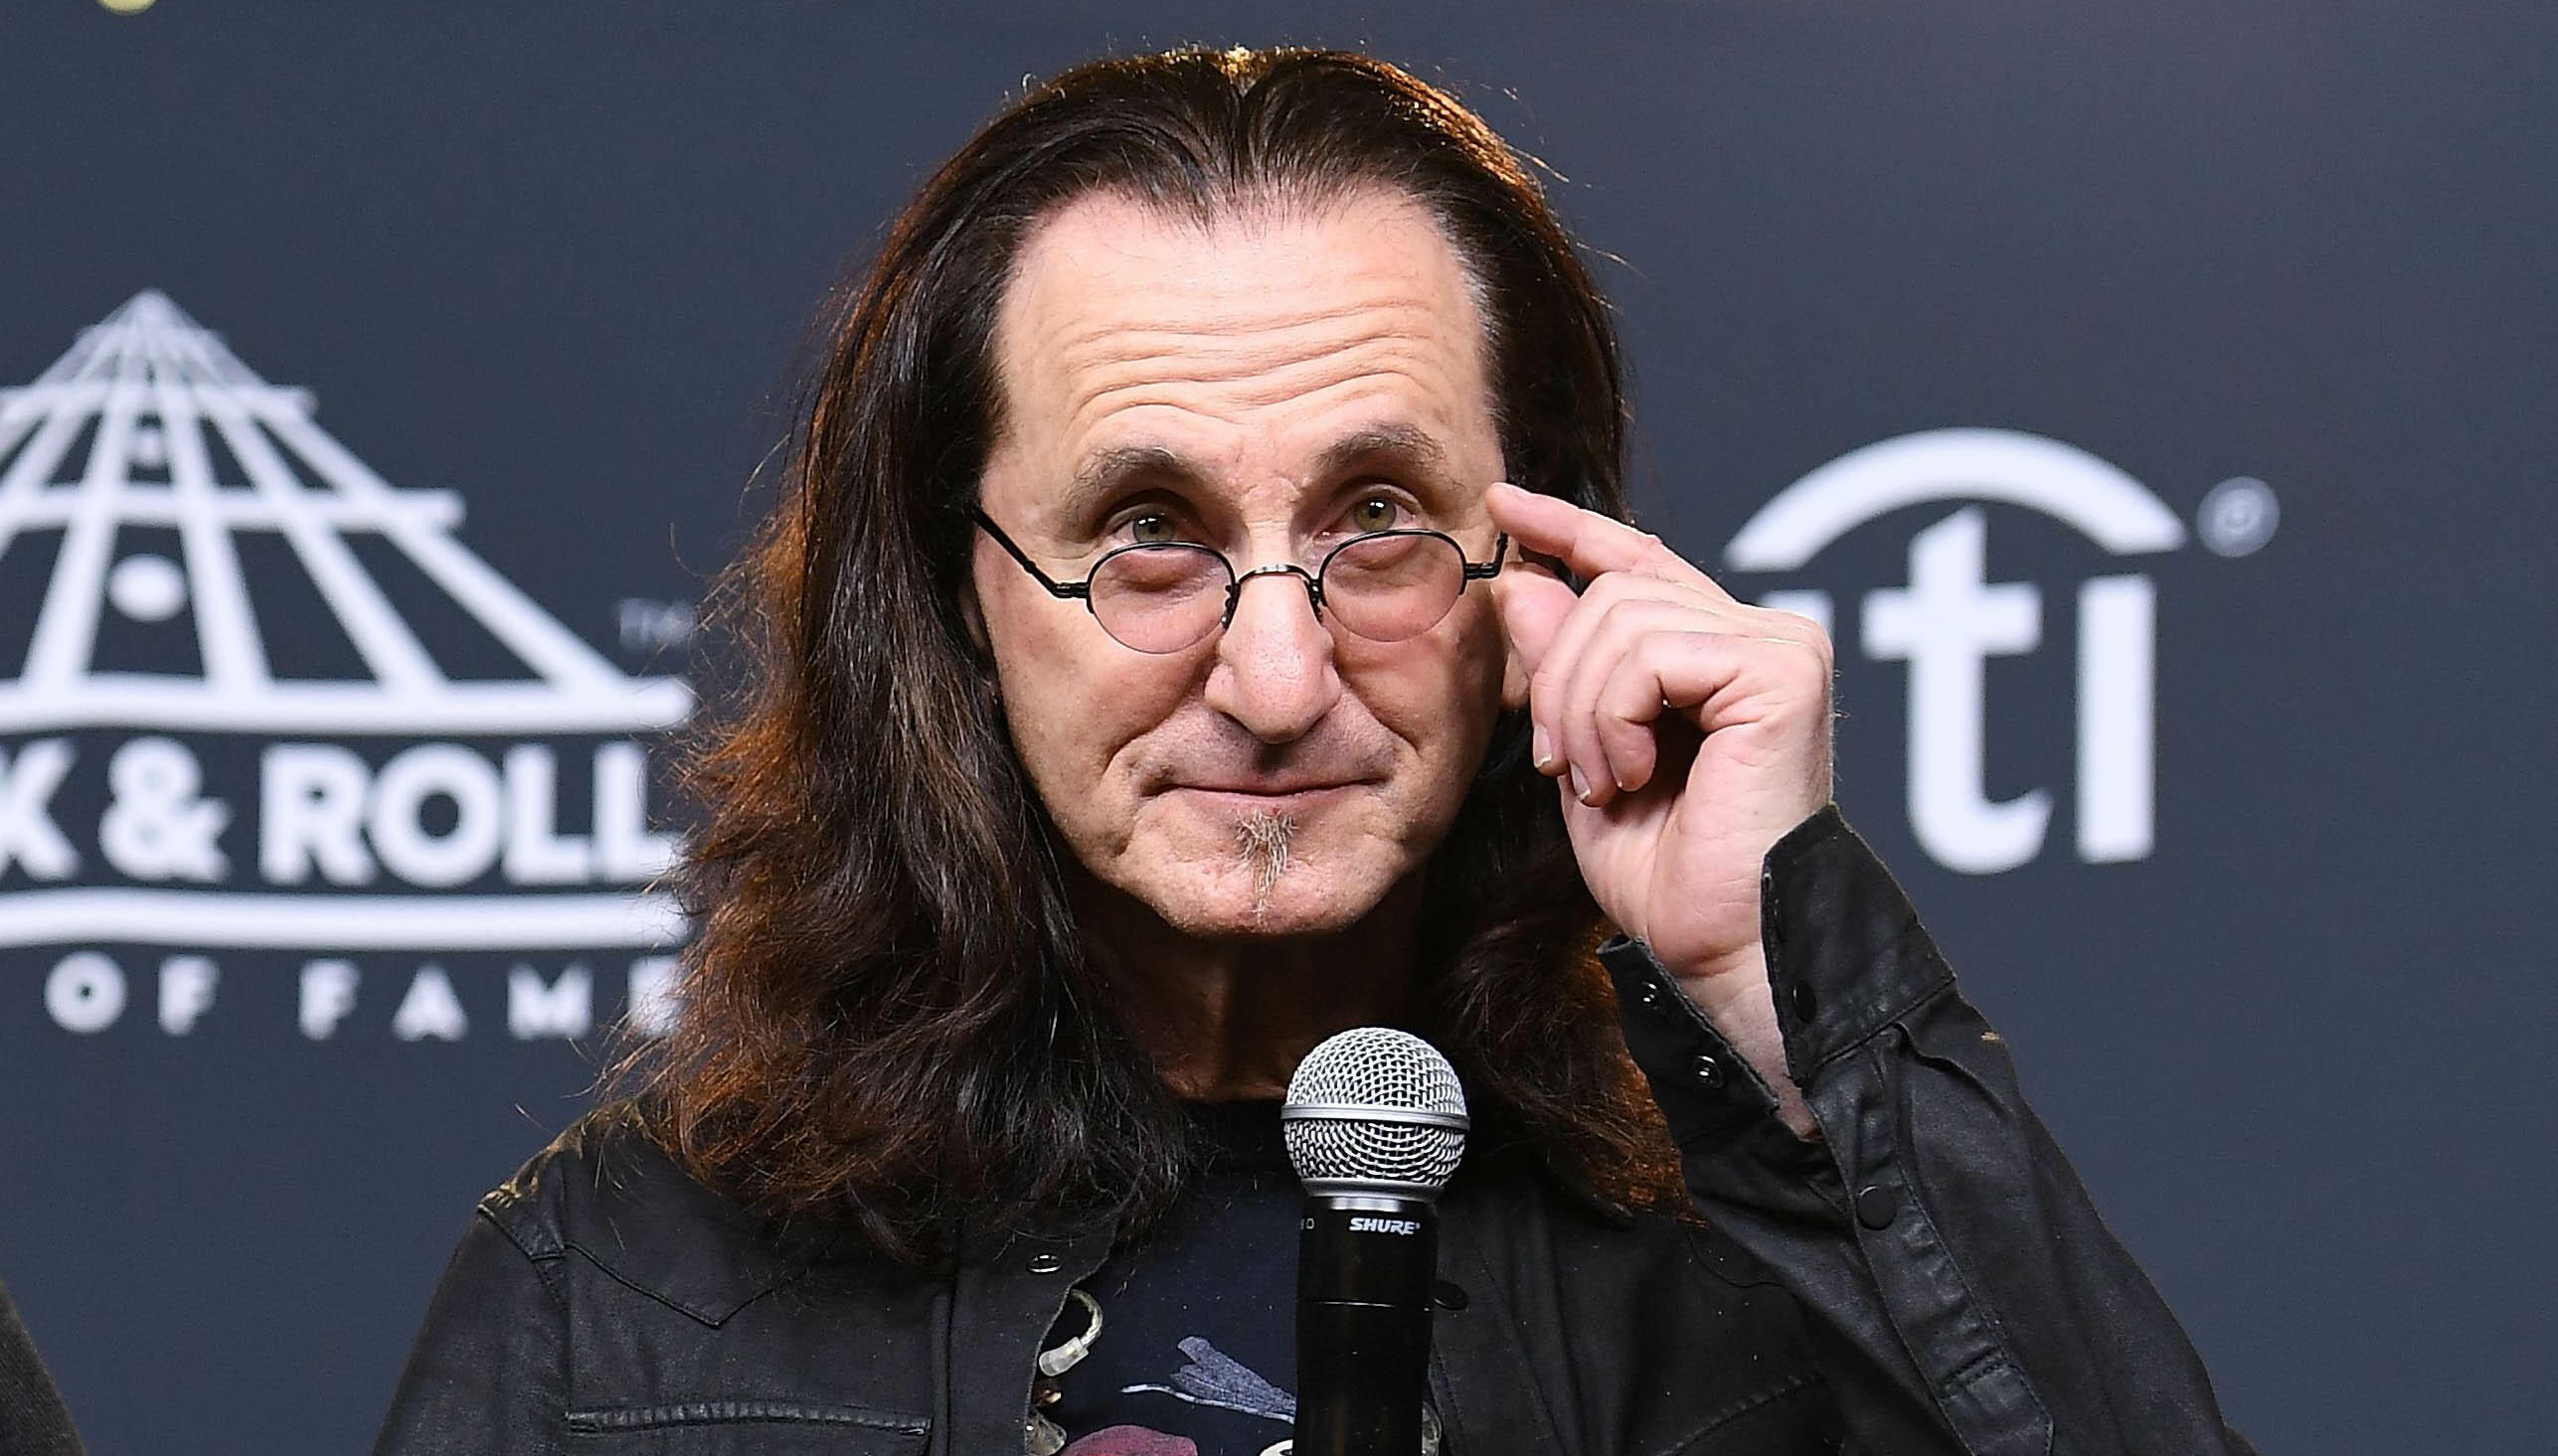 Geddy Lee Says Rush Band Members "Talk All the Time" | iHeart